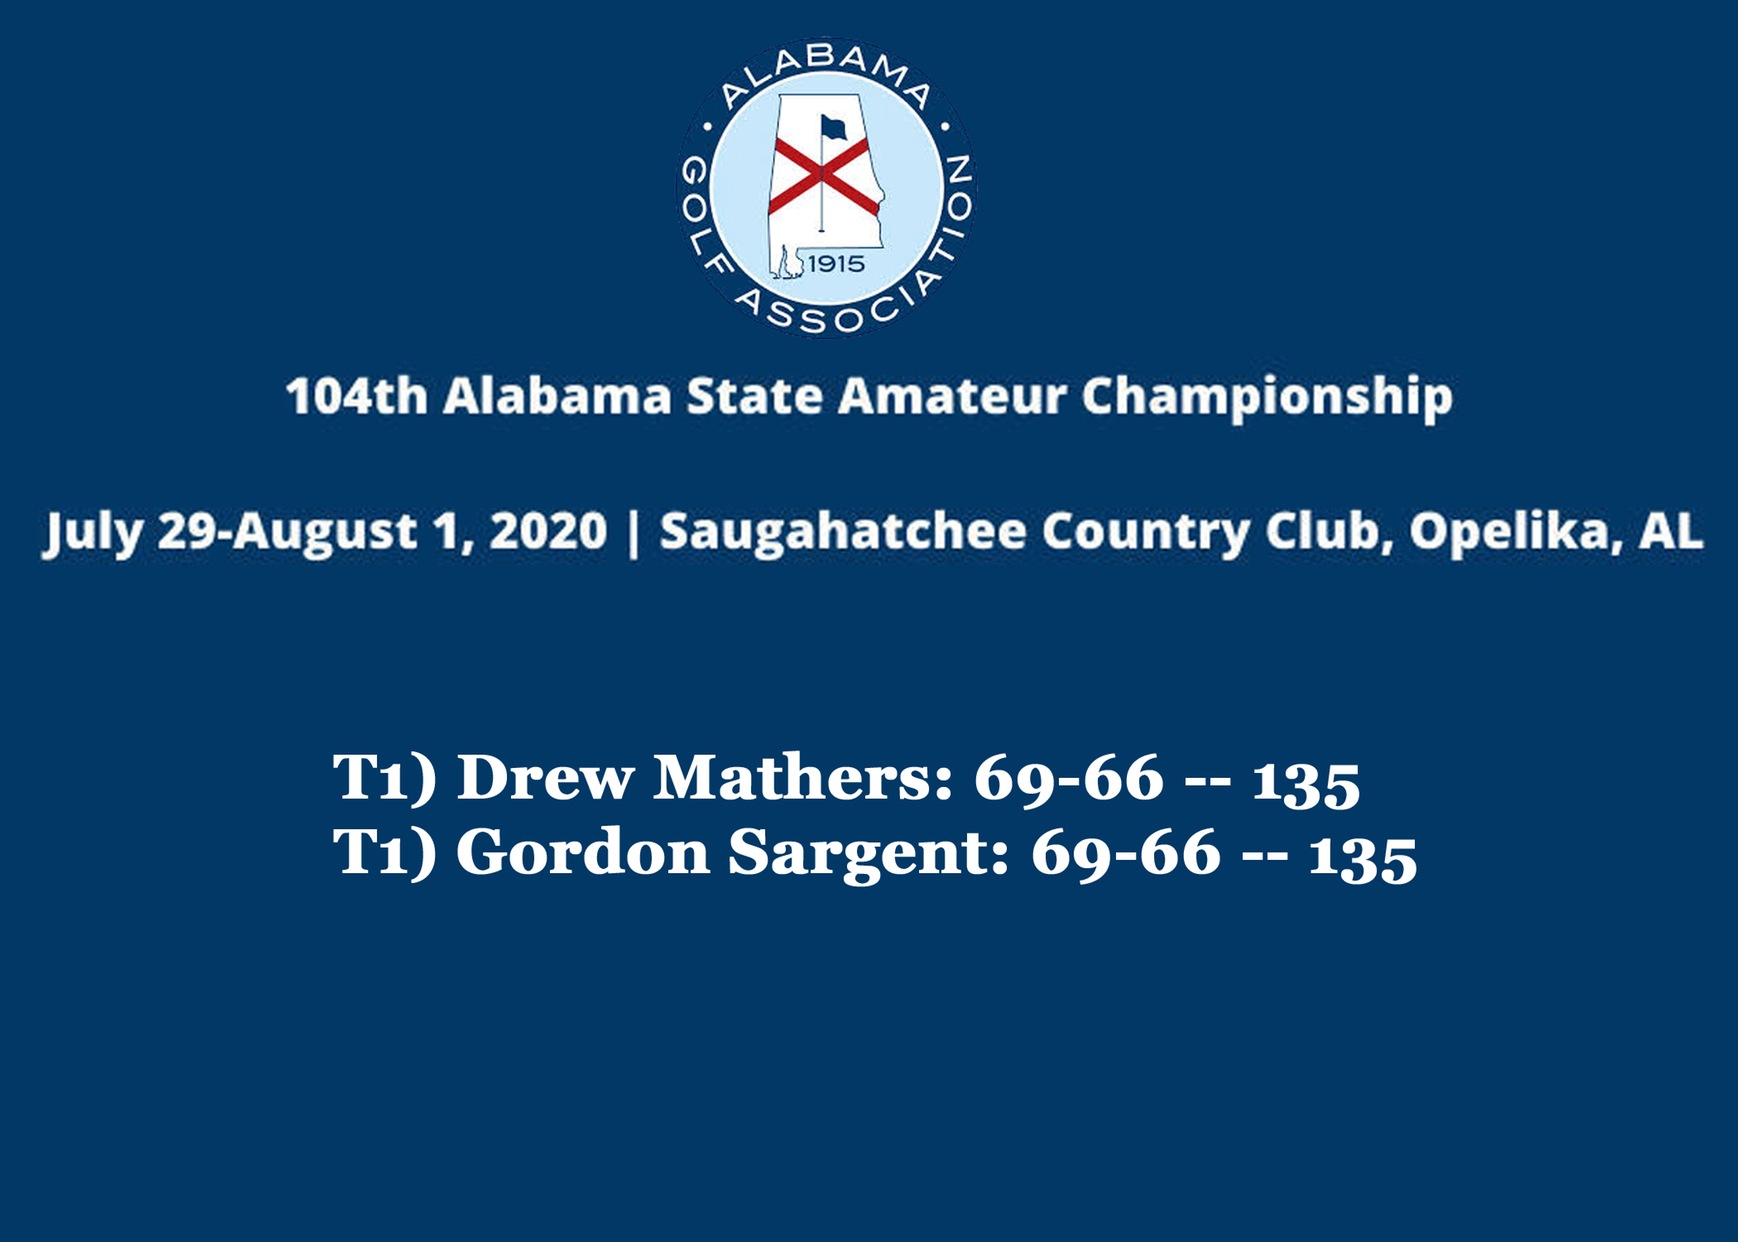 Mathers tied for 1st after first two rounds of Alabama State Amateur